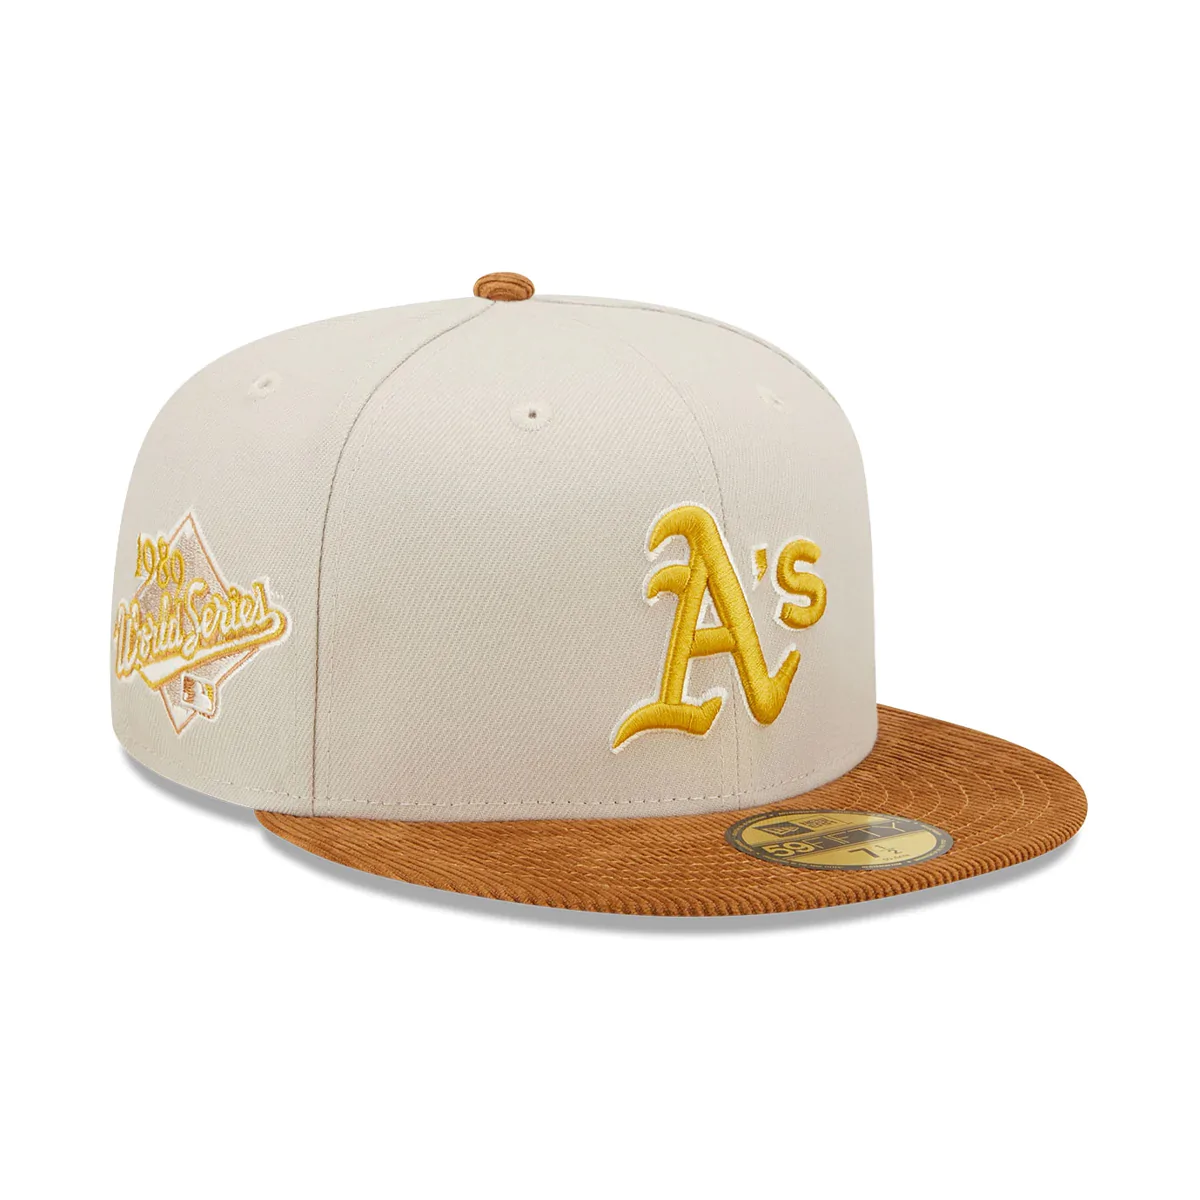 OAKLAND ATHLETICS CORD VISOR 59FIFTY FITTED HAT (CORDUROY BRIM)